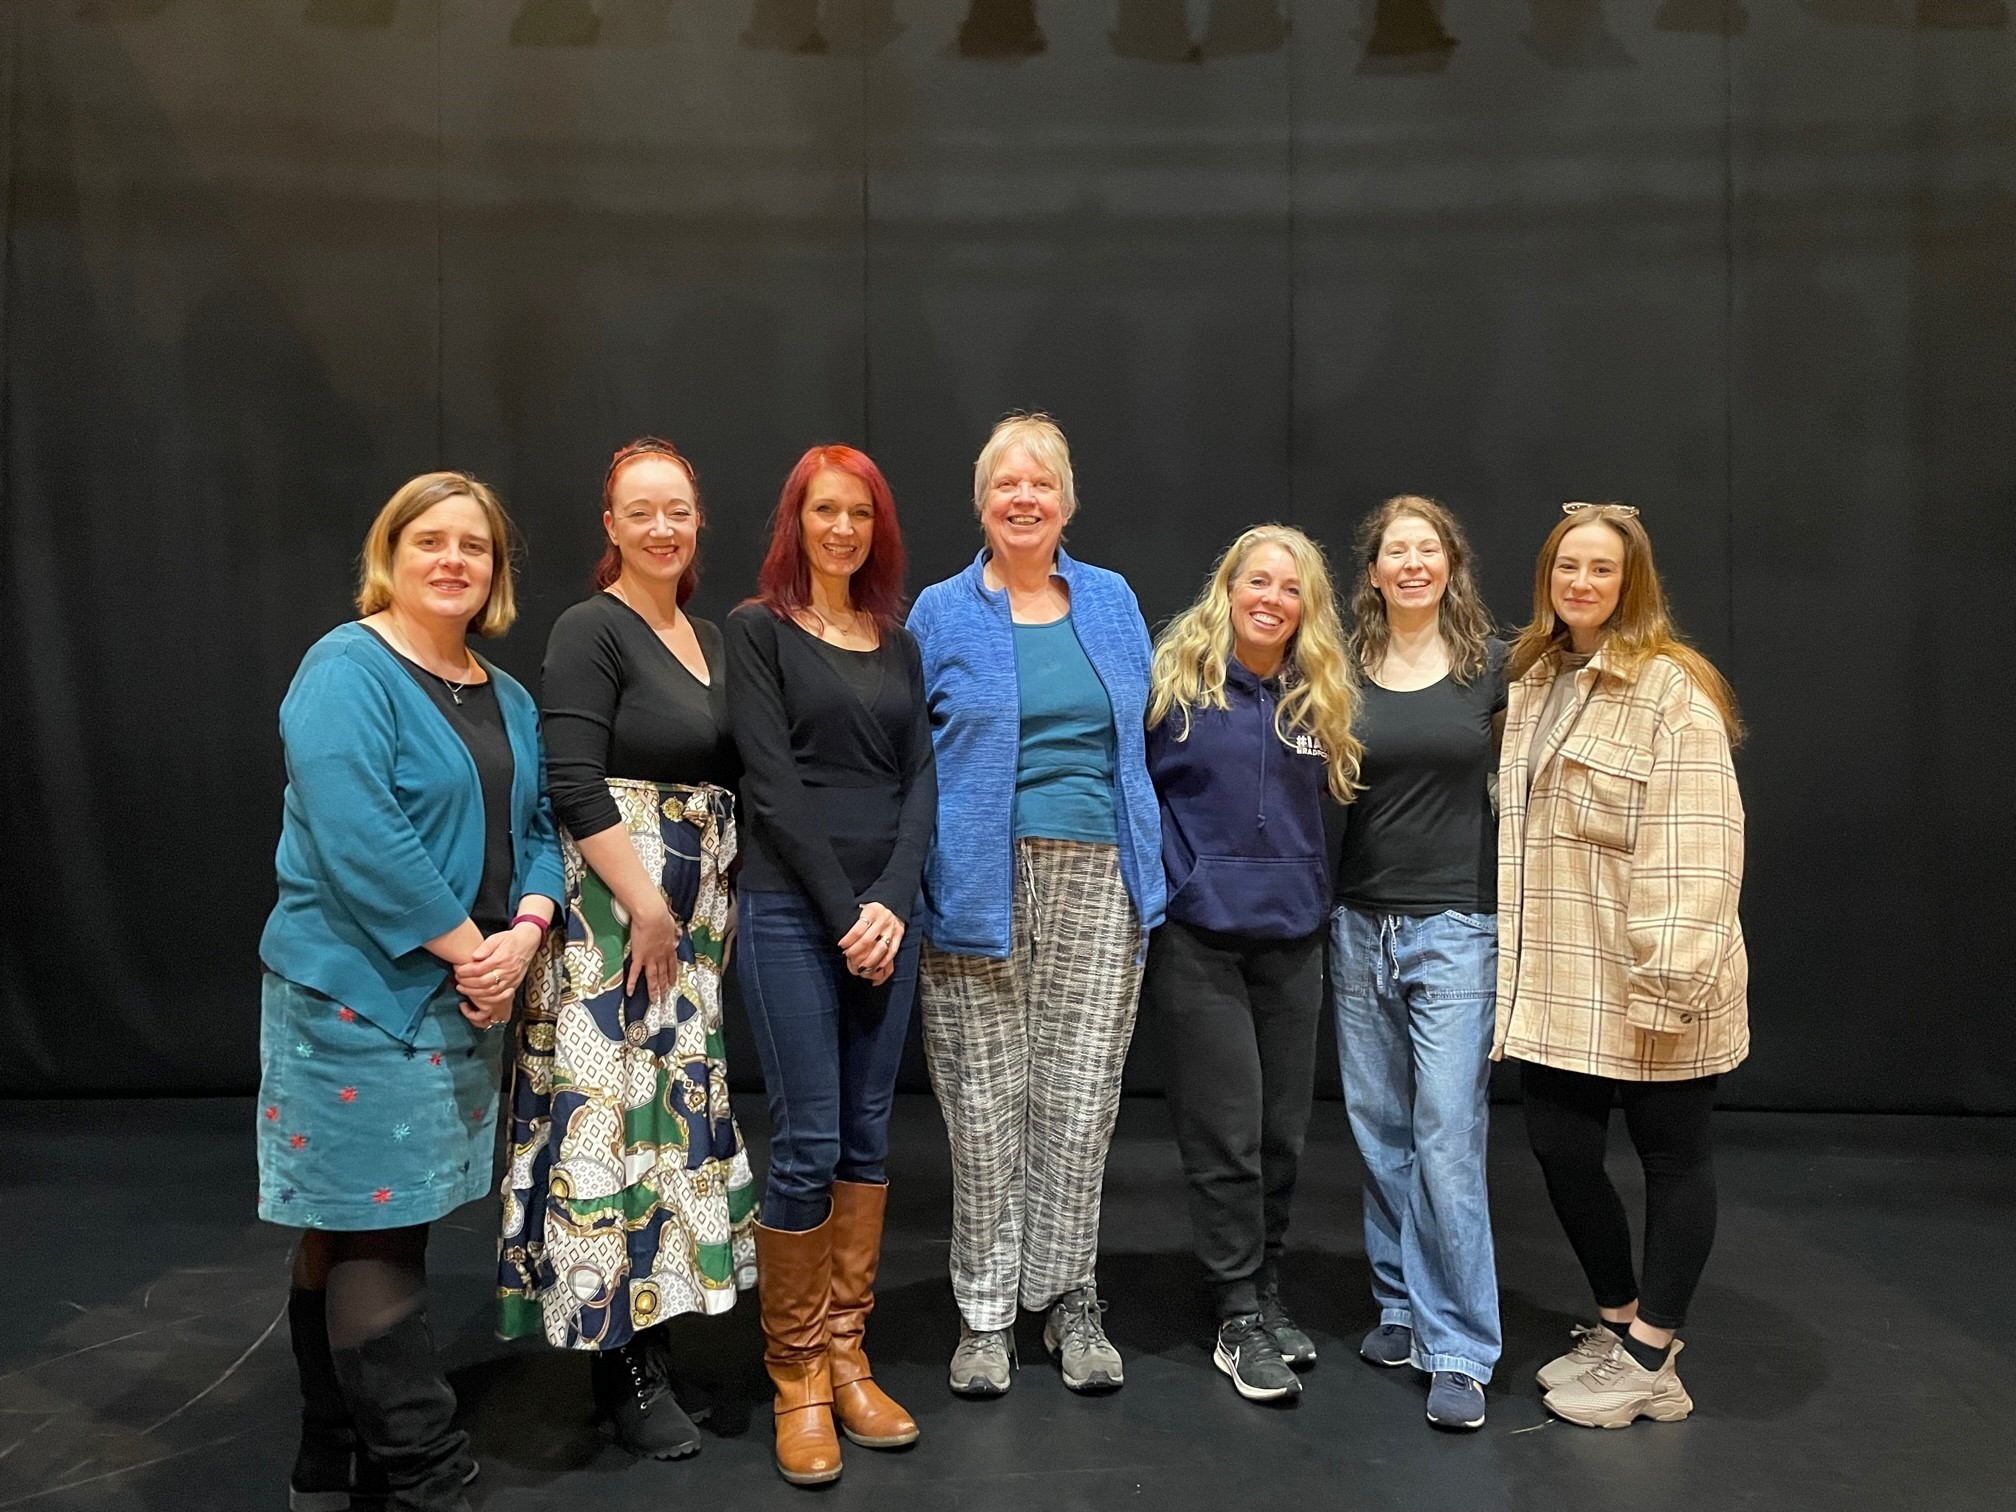 Bradford College staff to appear in the Royal Shakespeare Company’s Julius Caesar